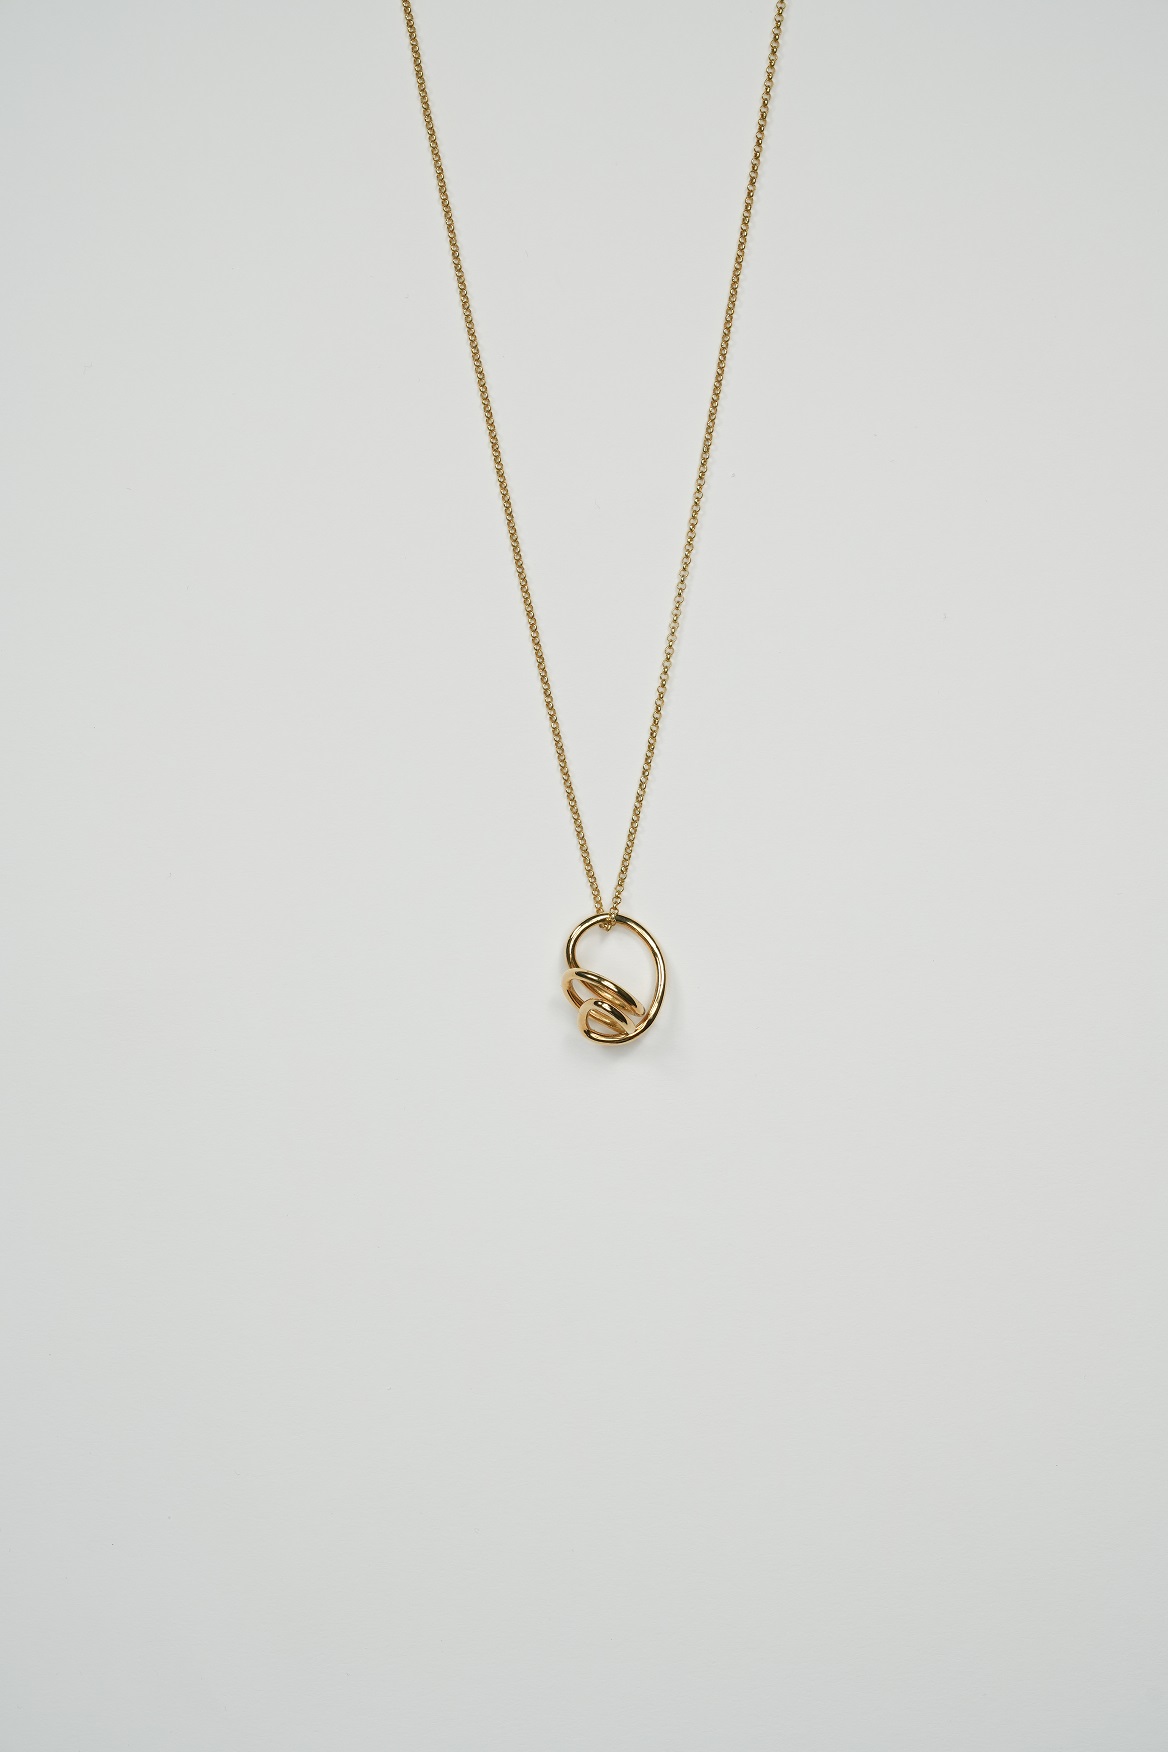 24k yellow gold vermeil pendant in 925 silver and chain-0